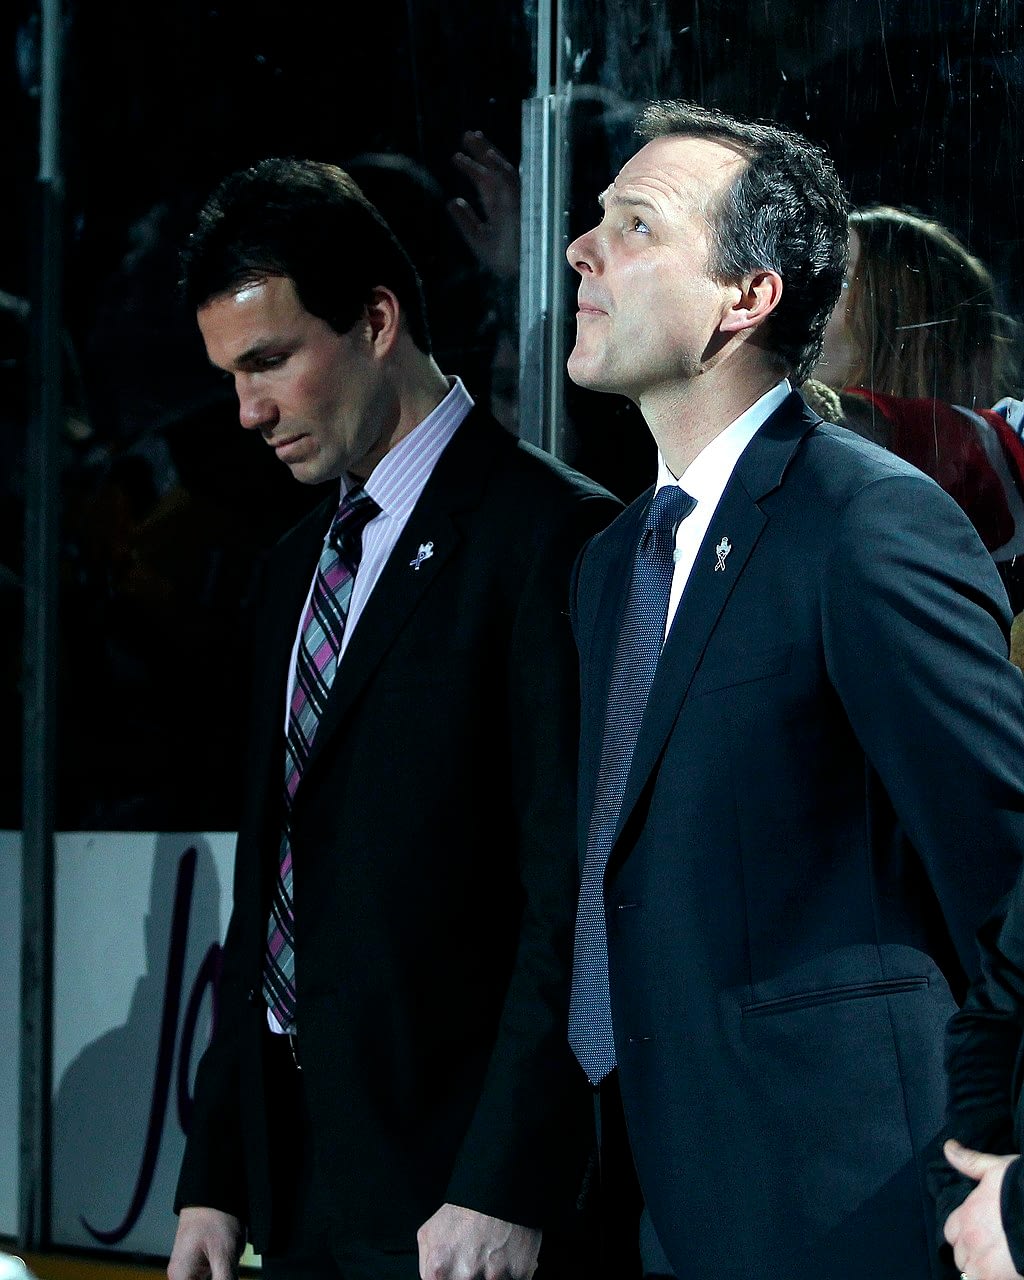 NHL coaching doesn't require previous playing success, Jon Cooper shows just that.